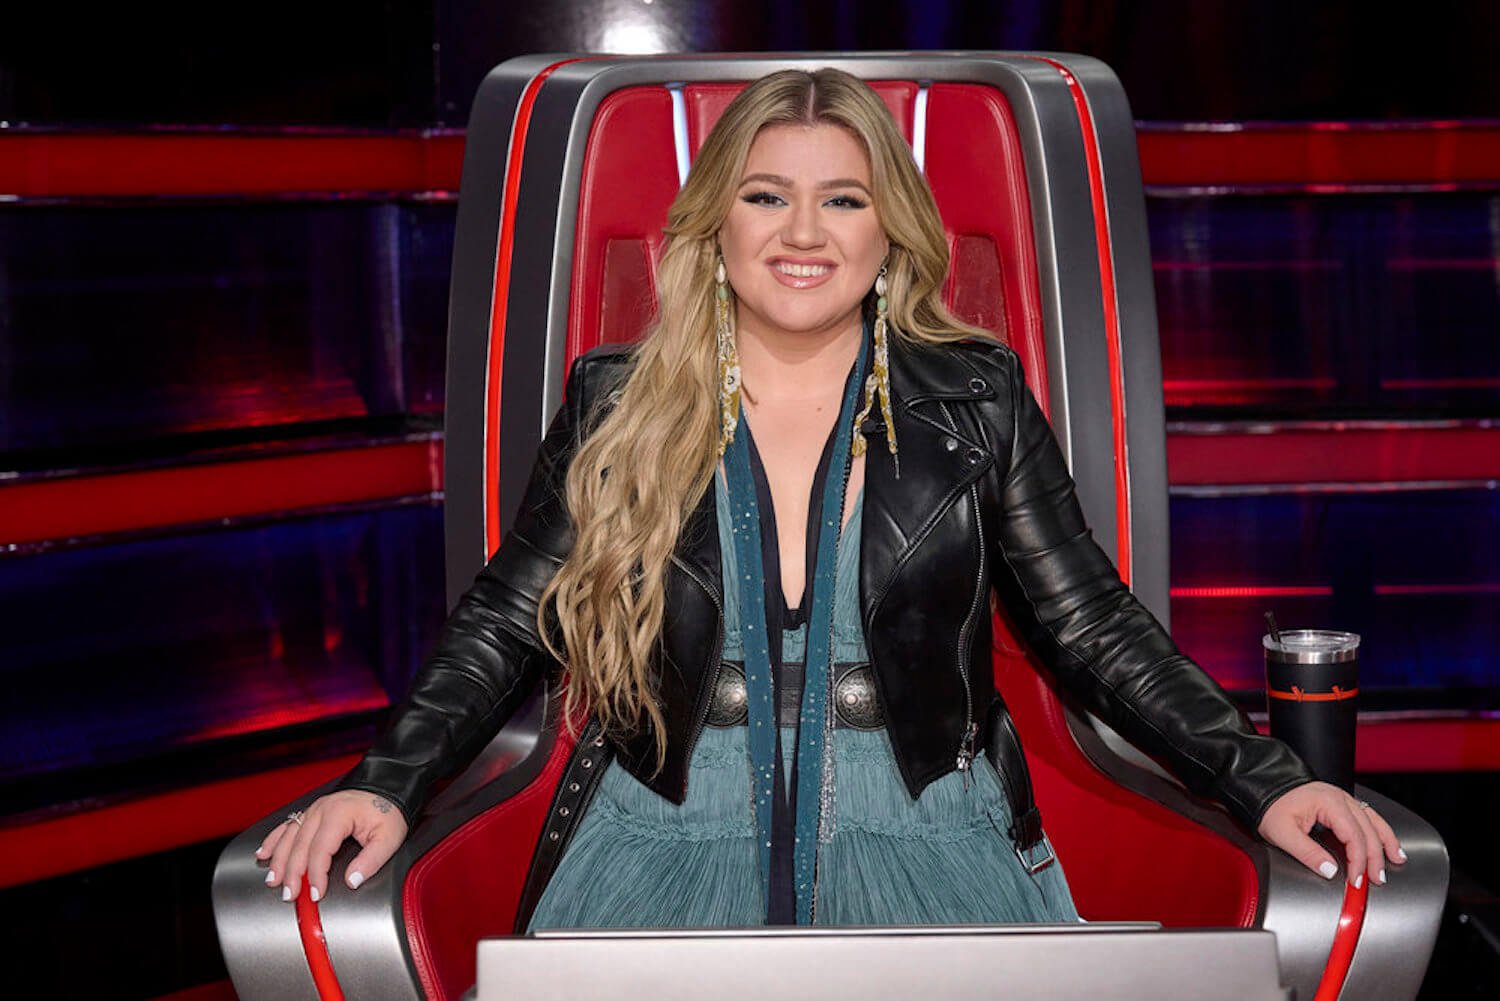 Kelly Clarkson smiling and sitting in a red chair on 'The Voice'